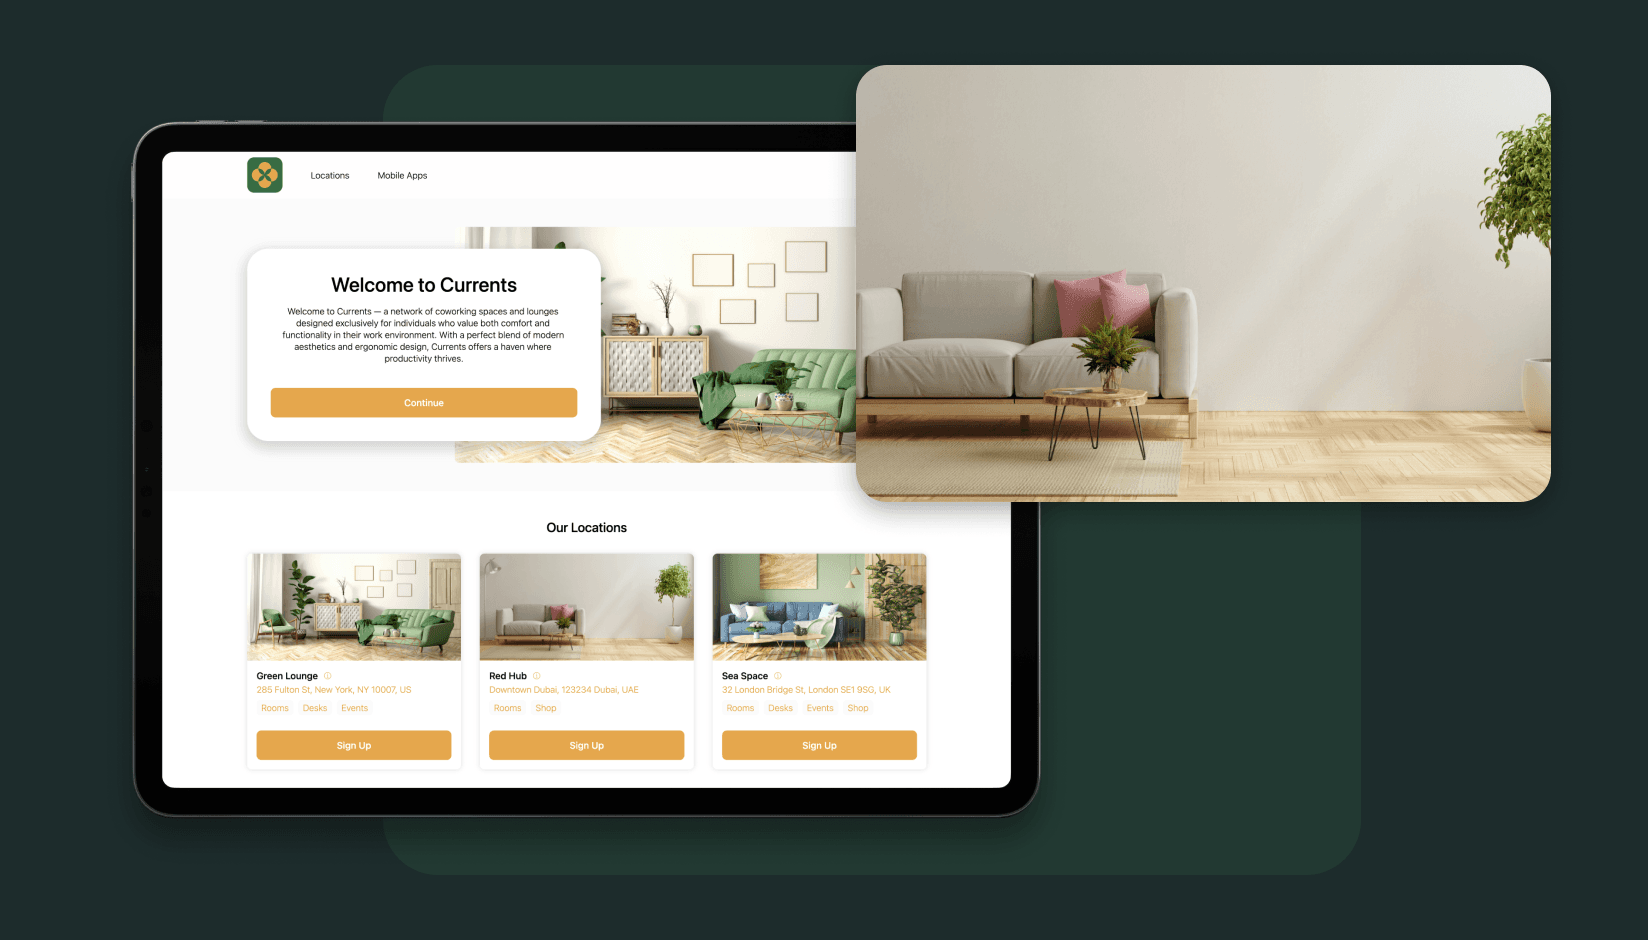 No-code landing page for coworking spaces developed by Spacebring